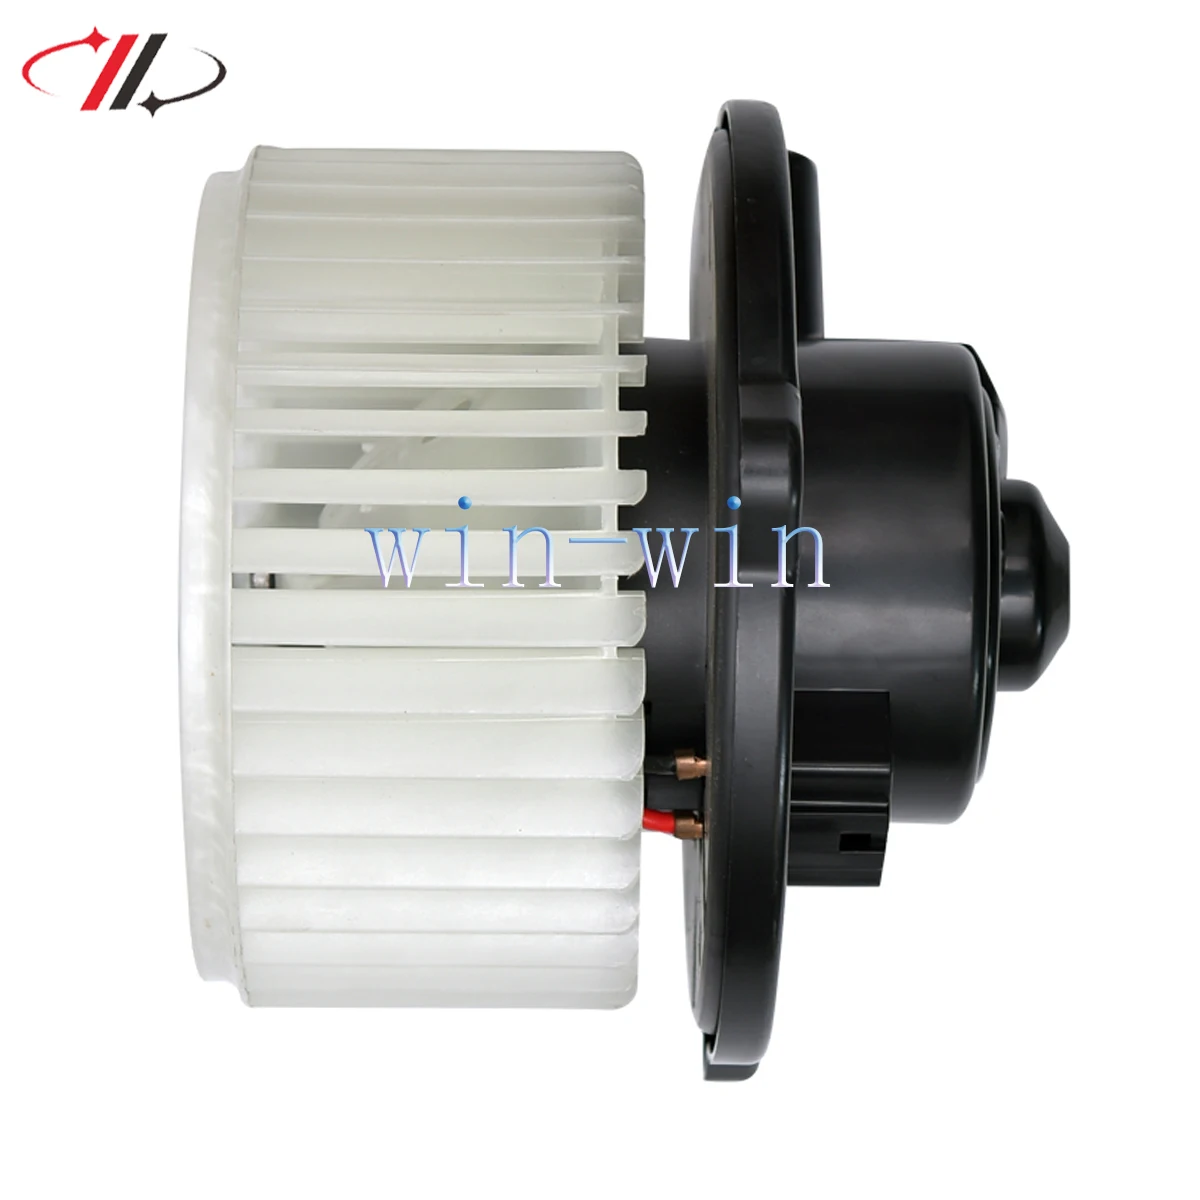 

LHD AHigh-Quality C A/C Blower Motor, Air Conditioner Fan, 87103-33040, 8710333040, for Toyota Camry, Hiace, Lexus ES300